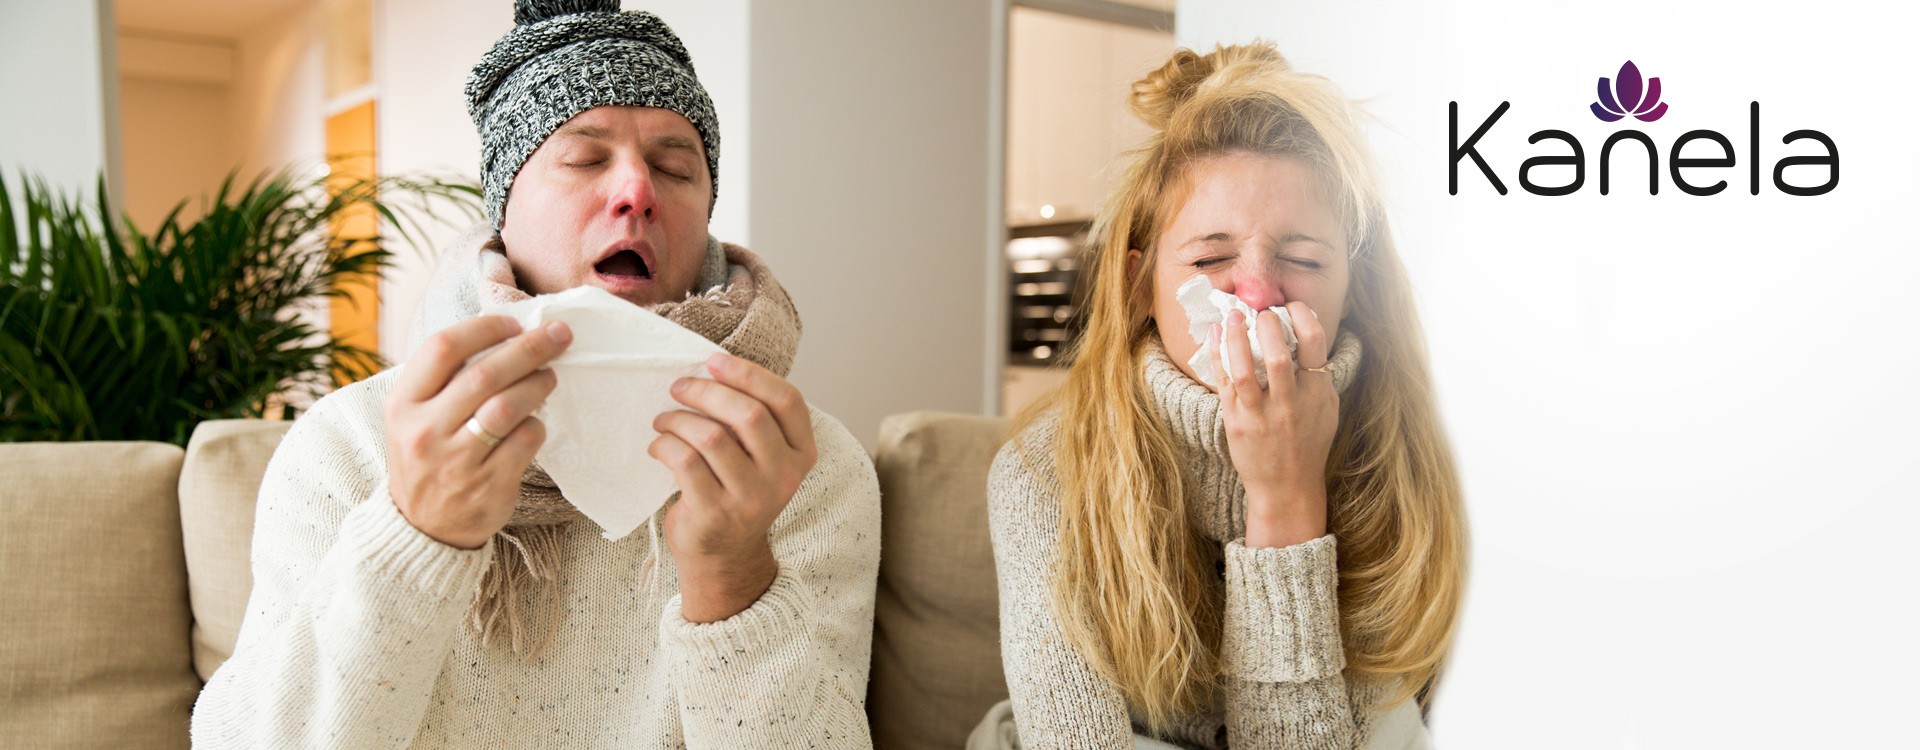 COLD OR FLU? HOW TO DIAGNOSE YOUR DISEASE CORRECTLY